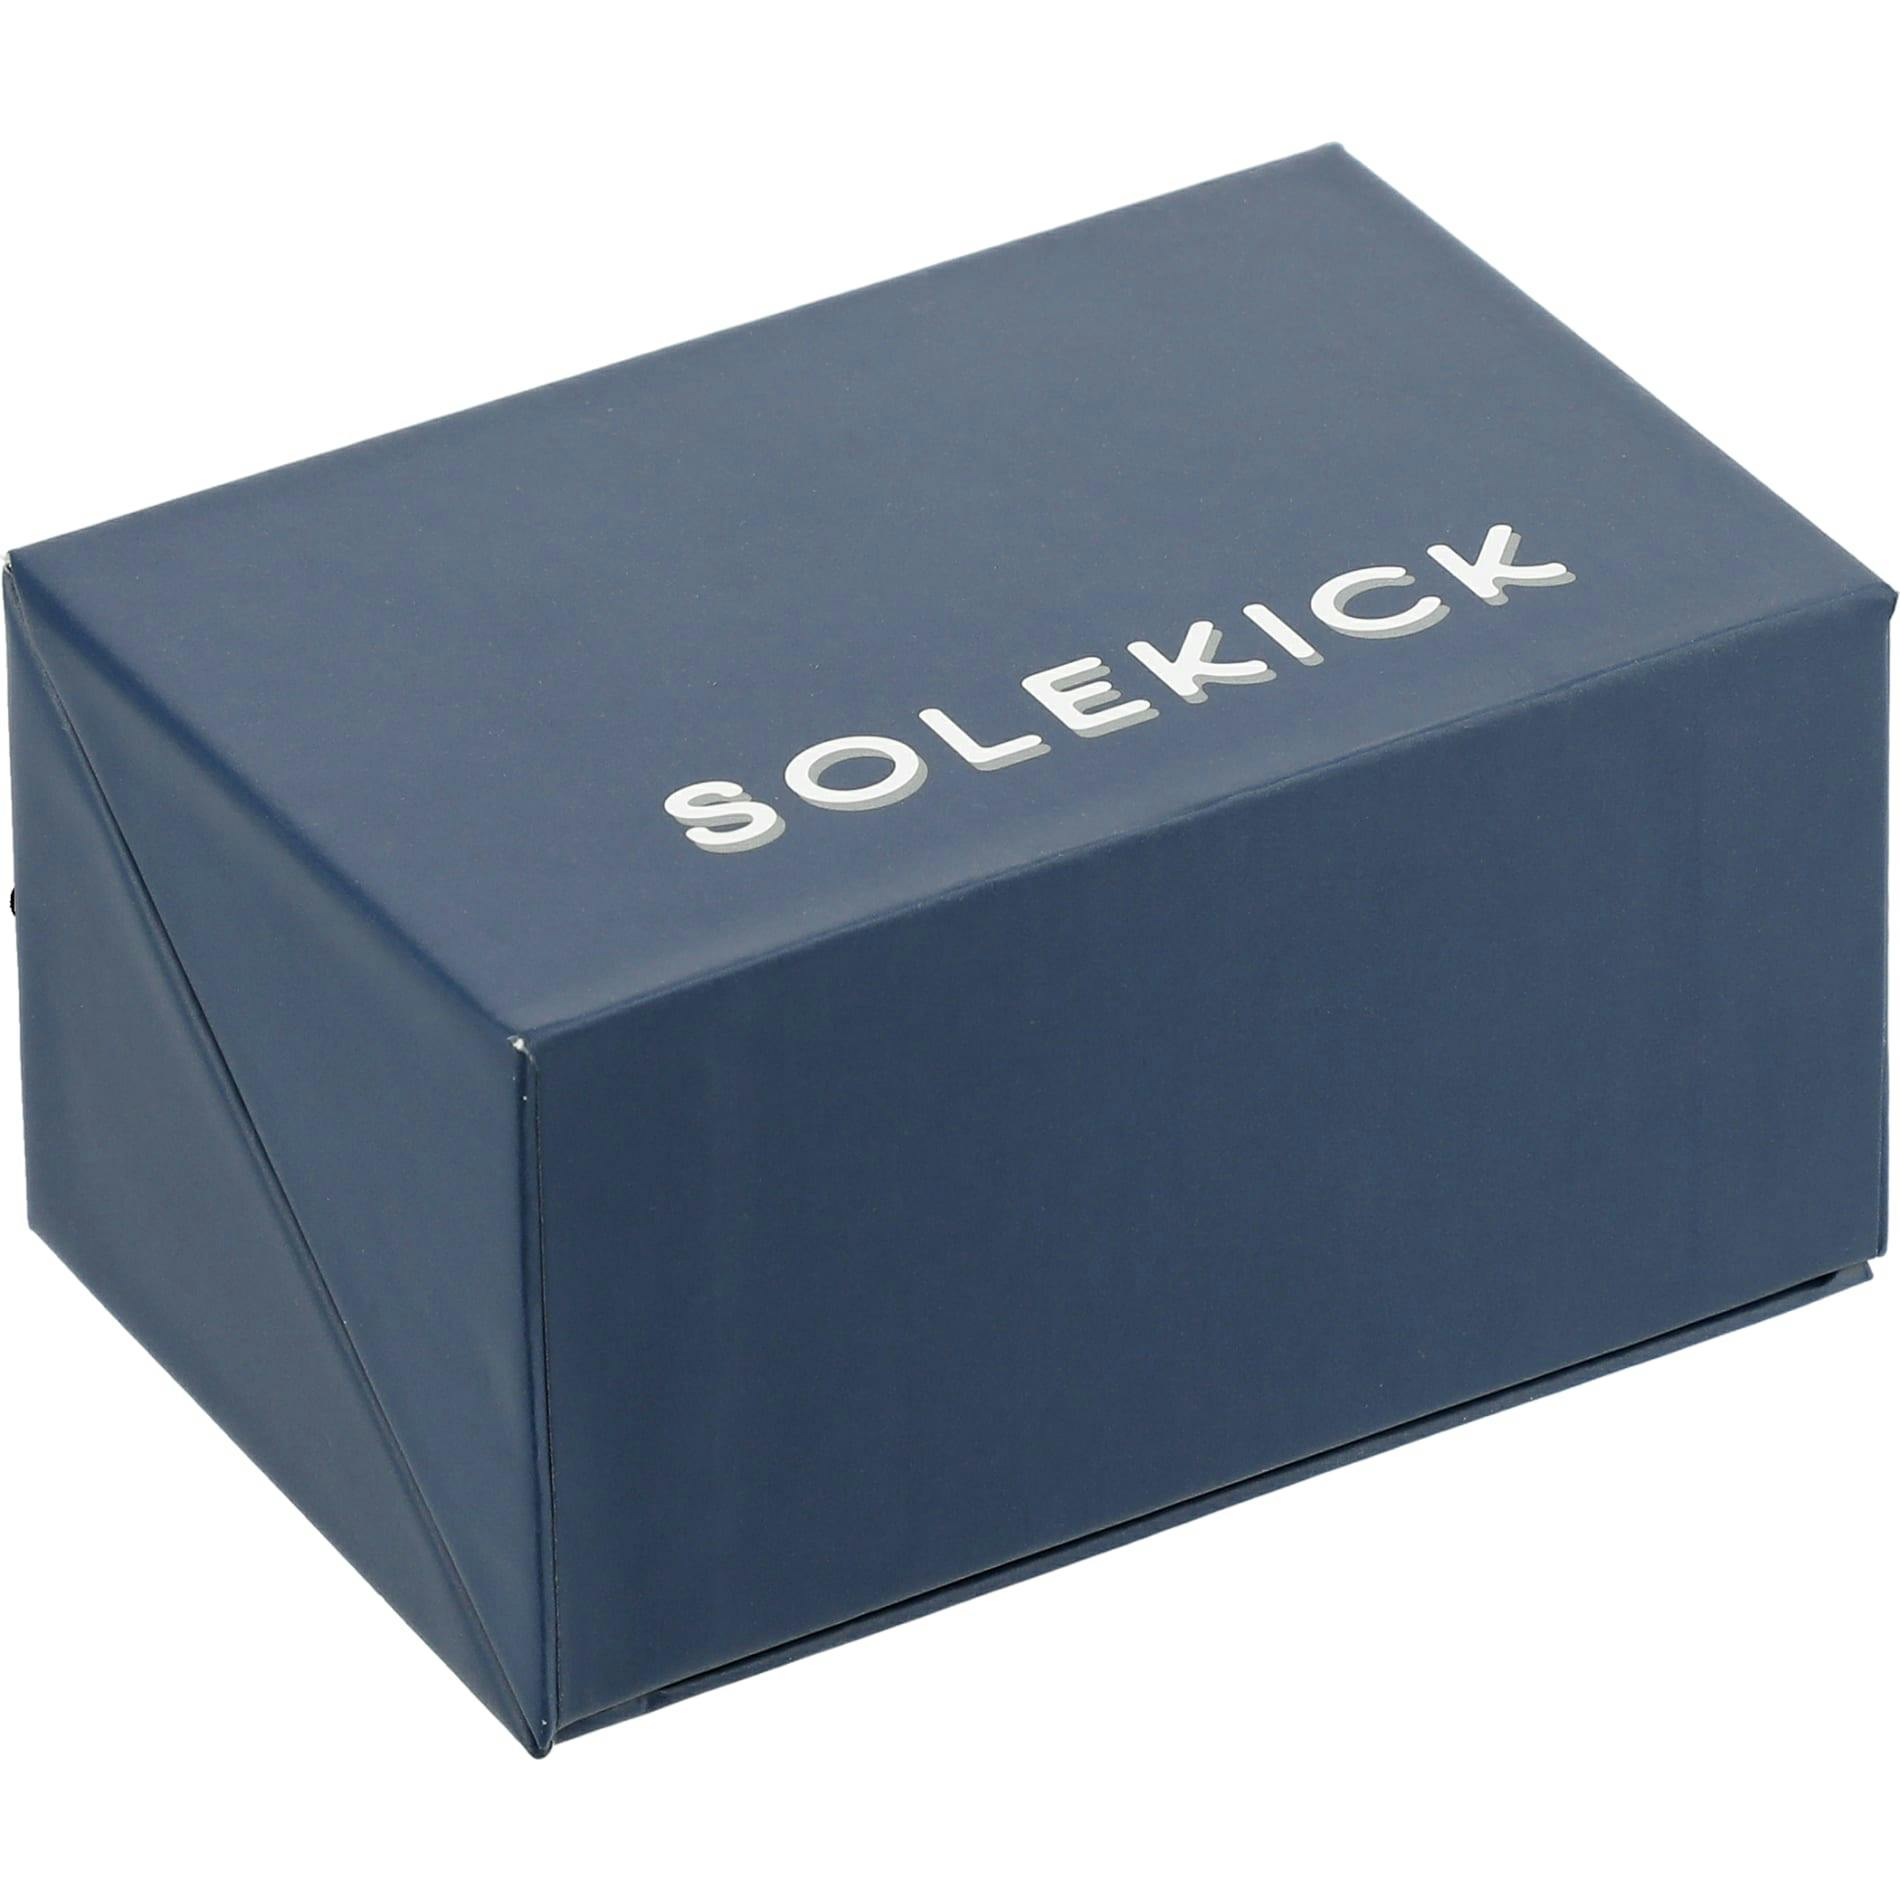 Solekick™ Quick Charge True Wireless Earbuds - additional Image 7